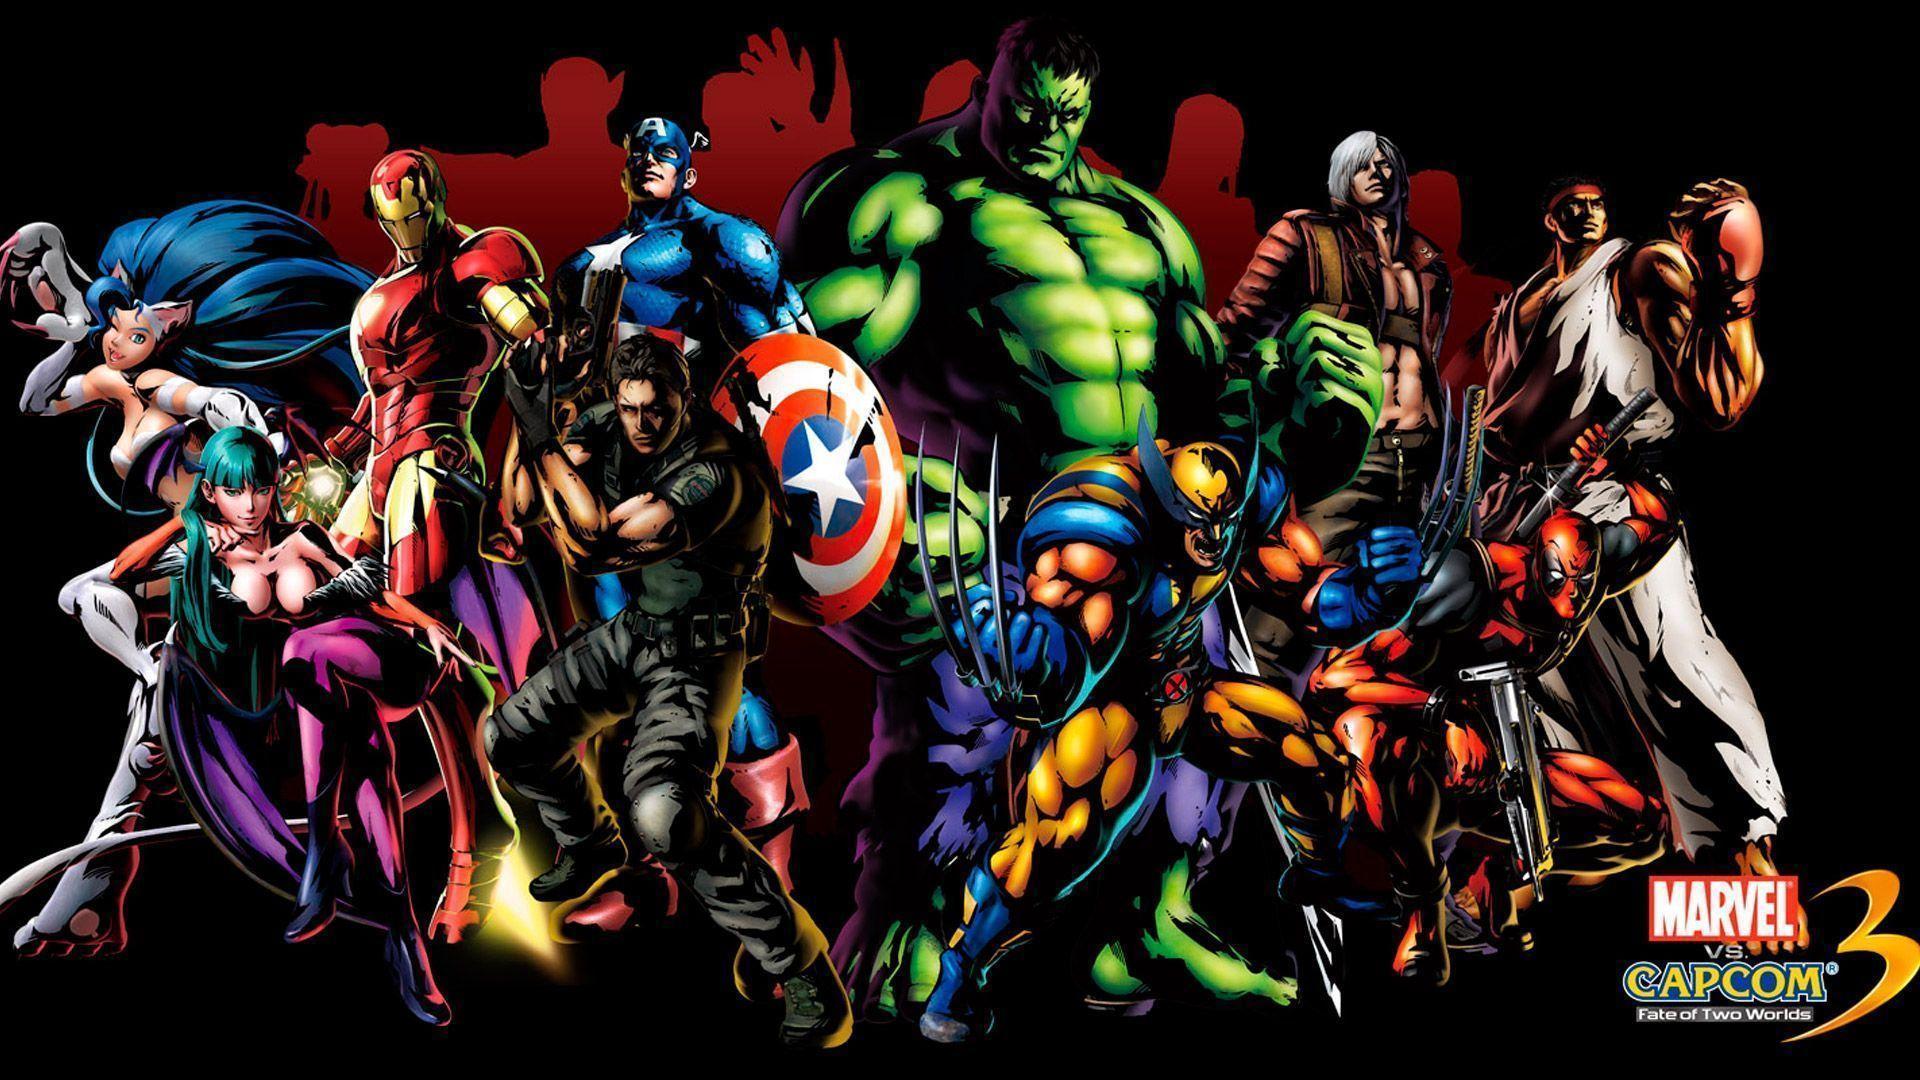 Image For > Marvel Heroes And Villains Wallpapers